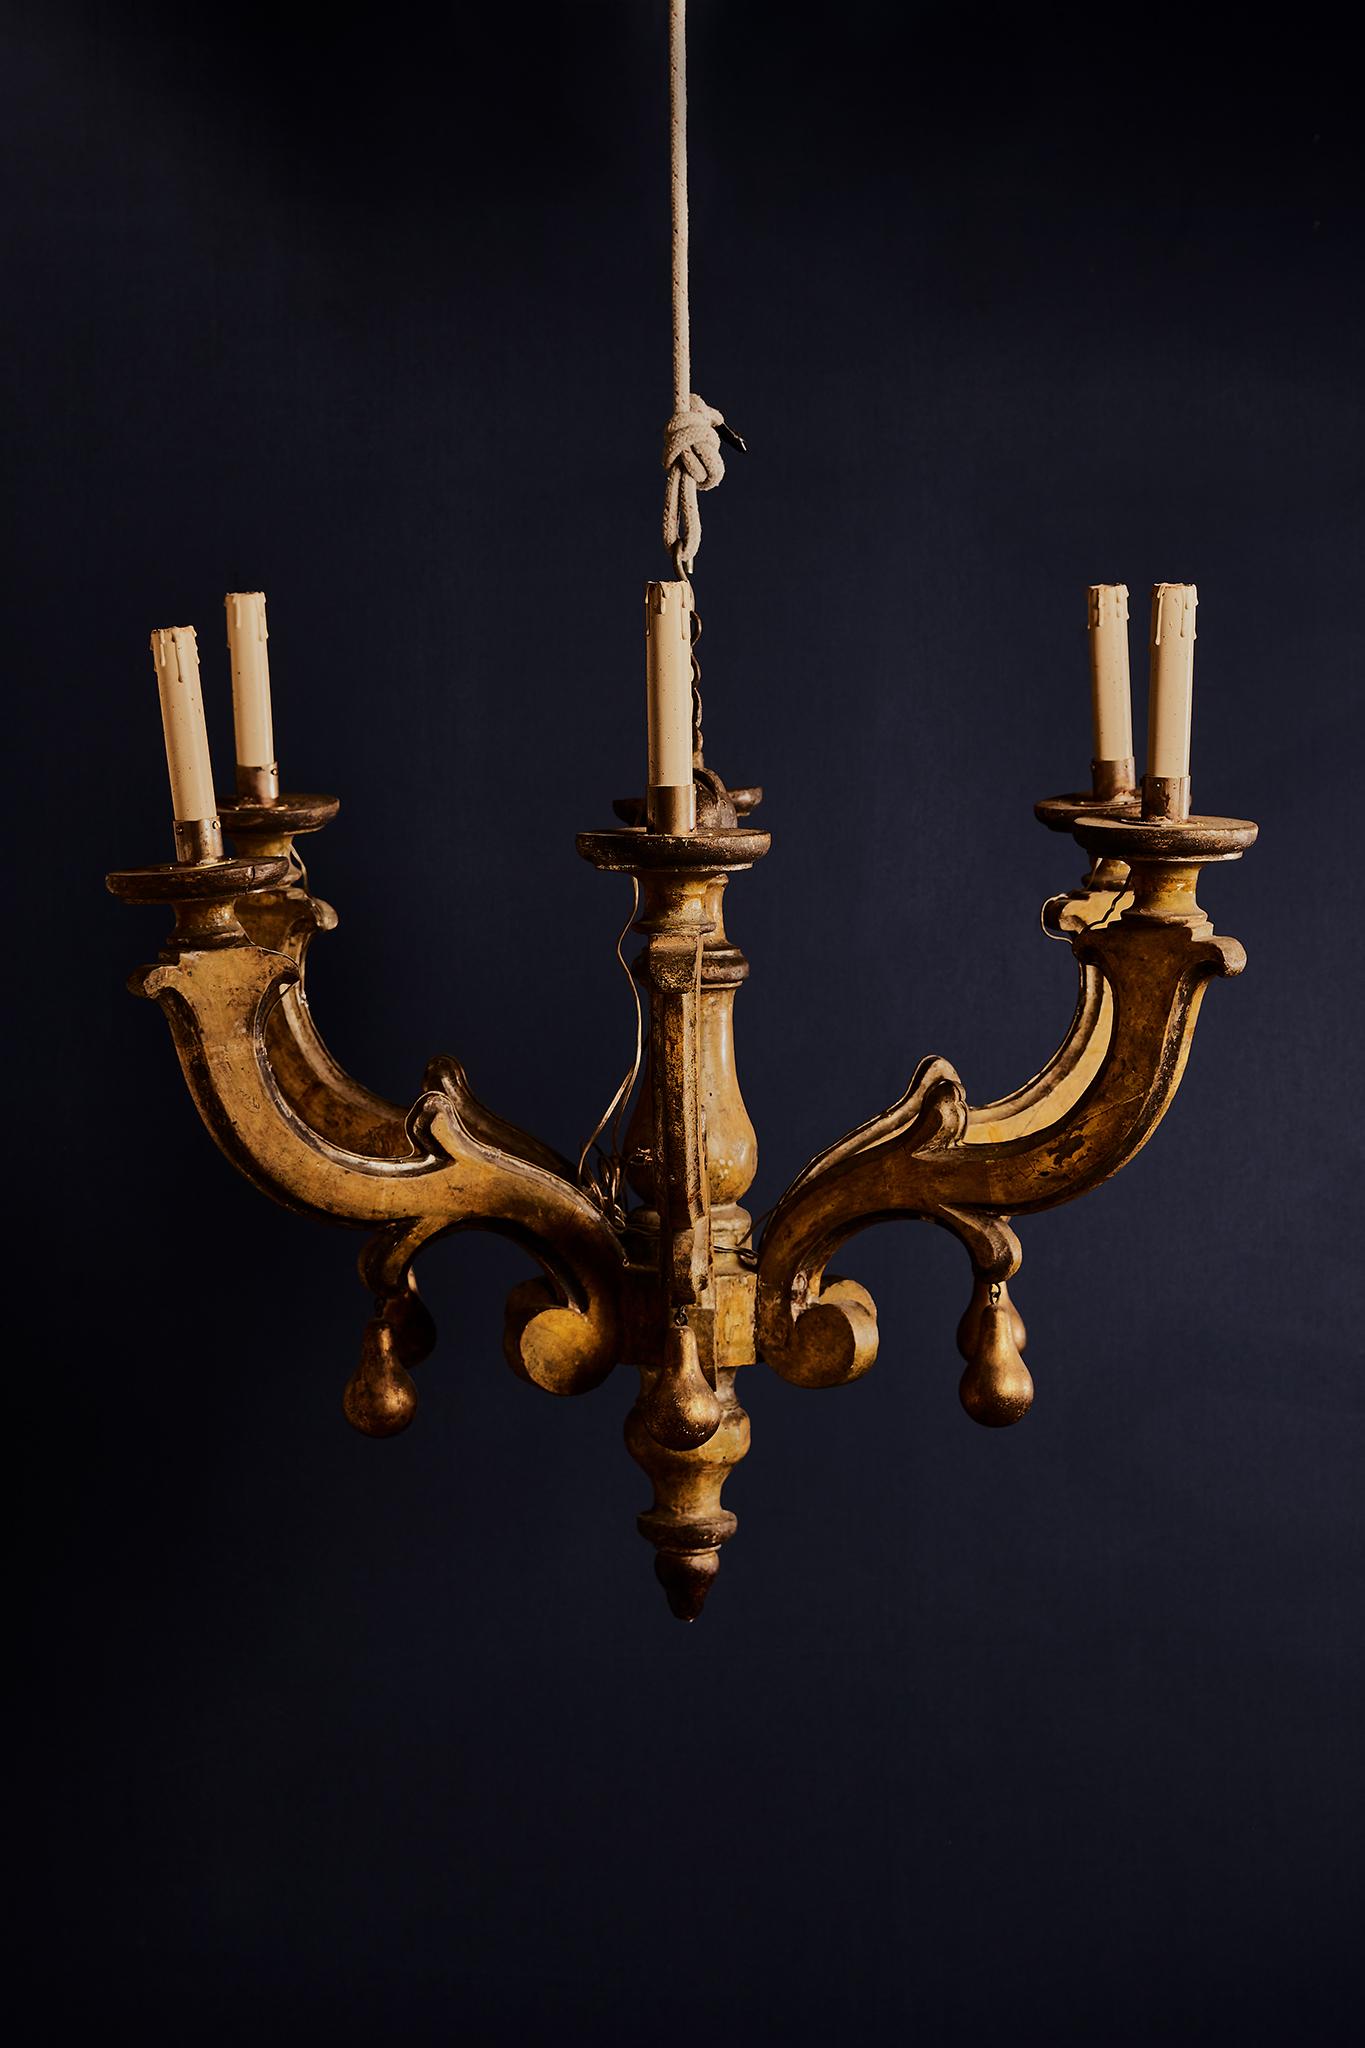 18th Century lacquered wood chandelier.